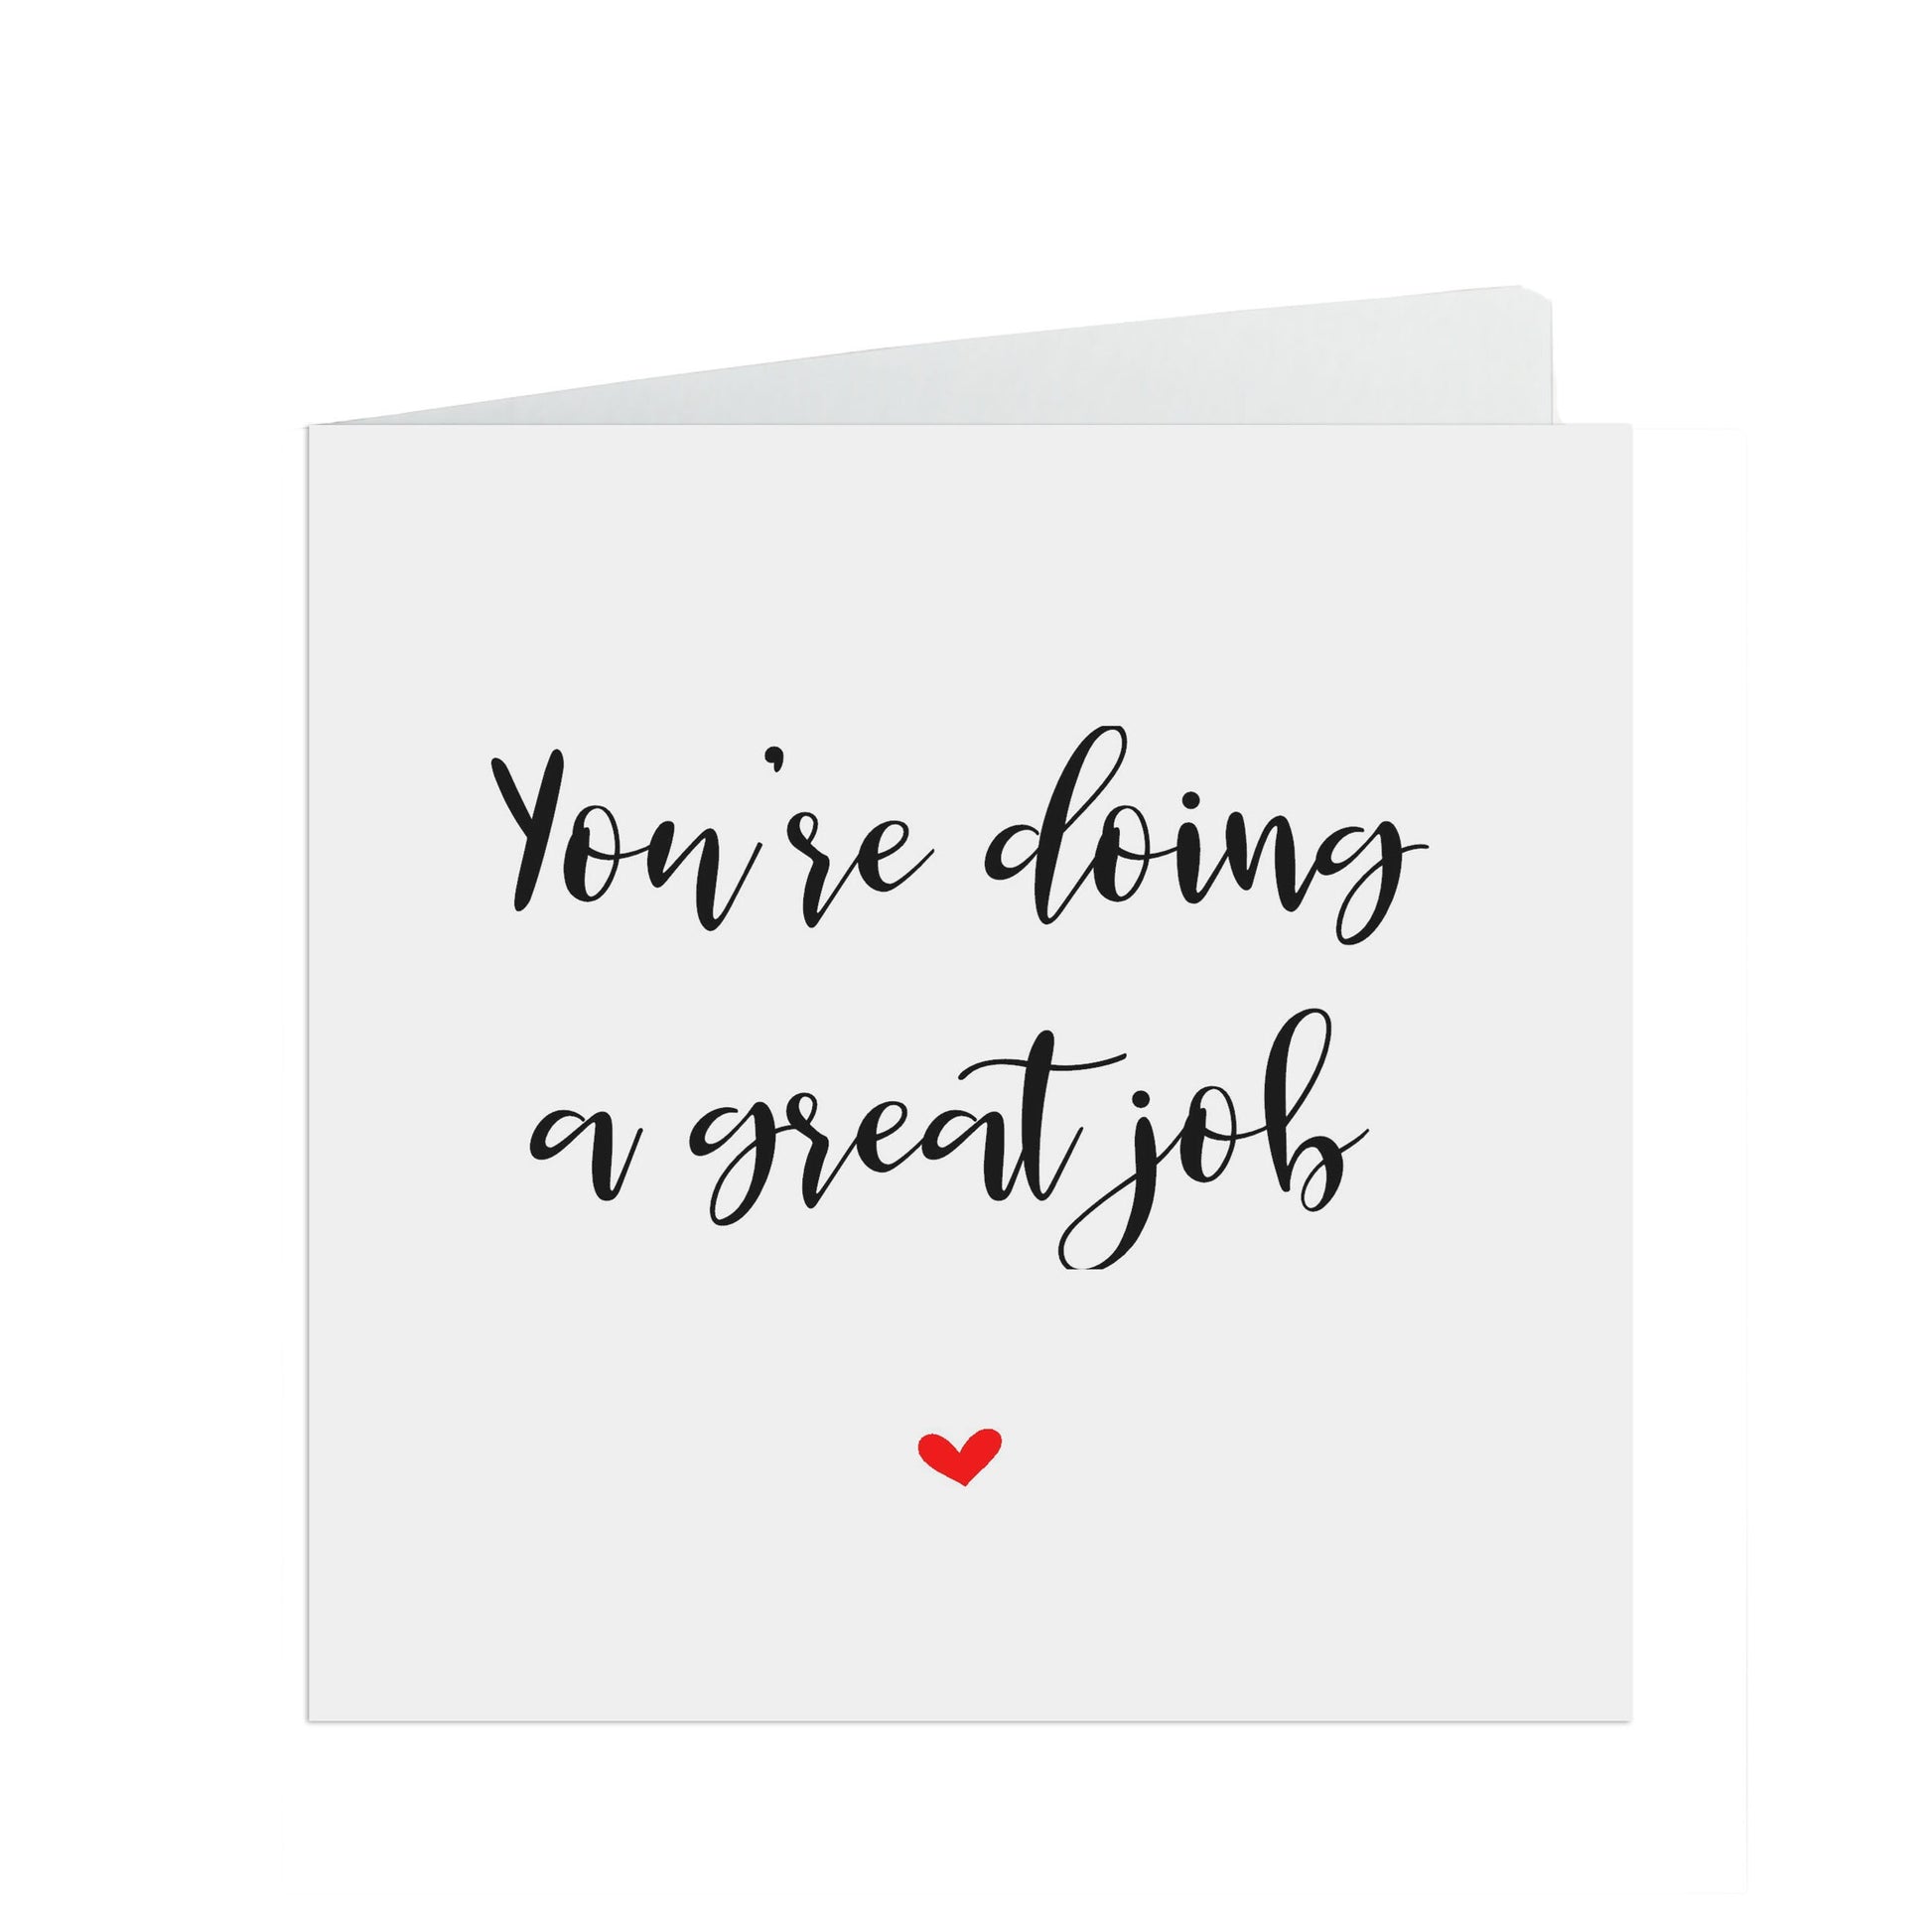 You're doing a great job! Script motivation, encouragement or support card